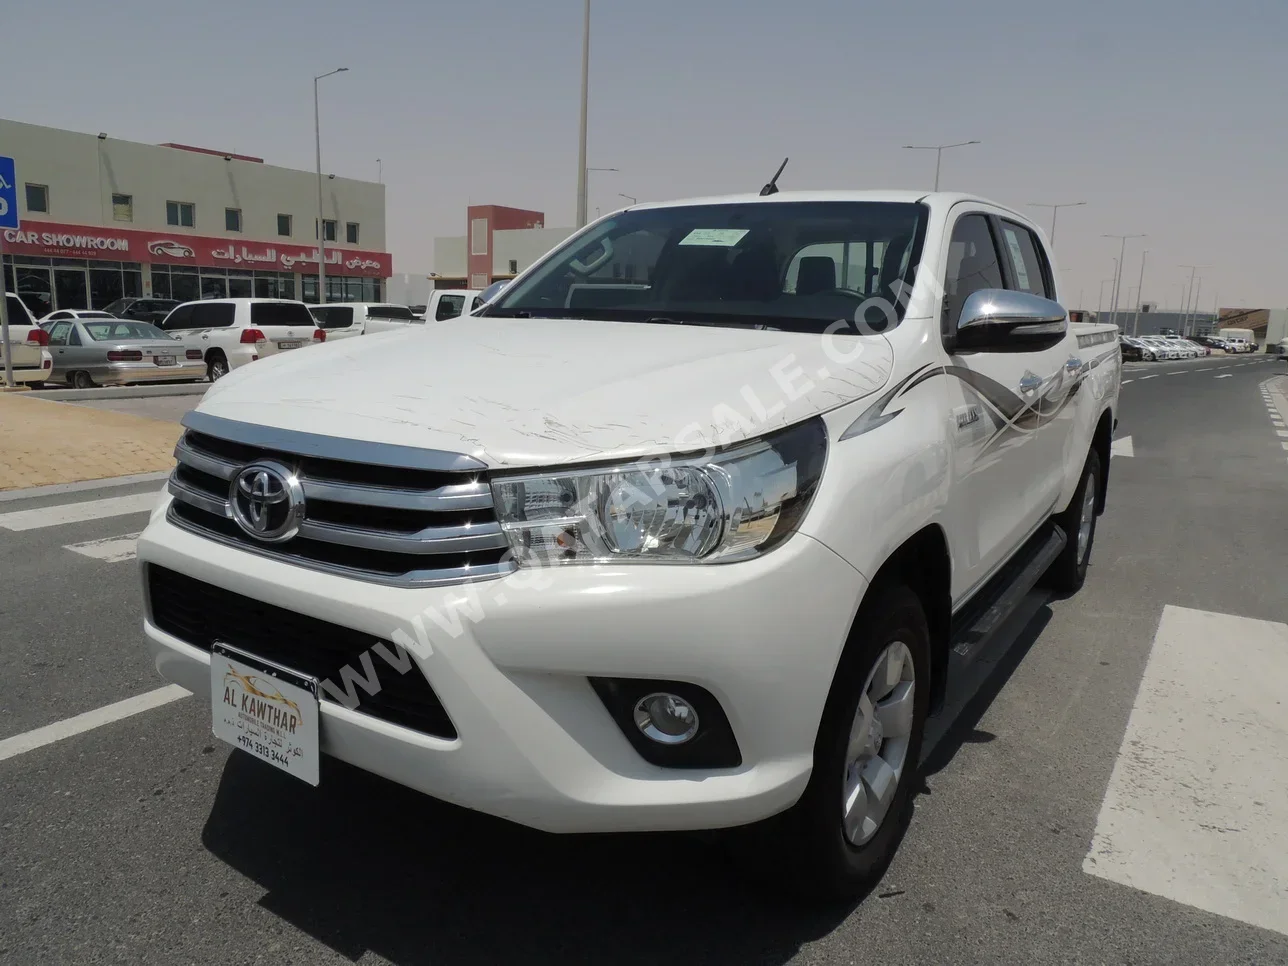 Toyota  Hilux  SR5  2017  Automatic  43,000 Km  4 Cylinder  Four Wheel Drive (4WD)  Pick Up  White